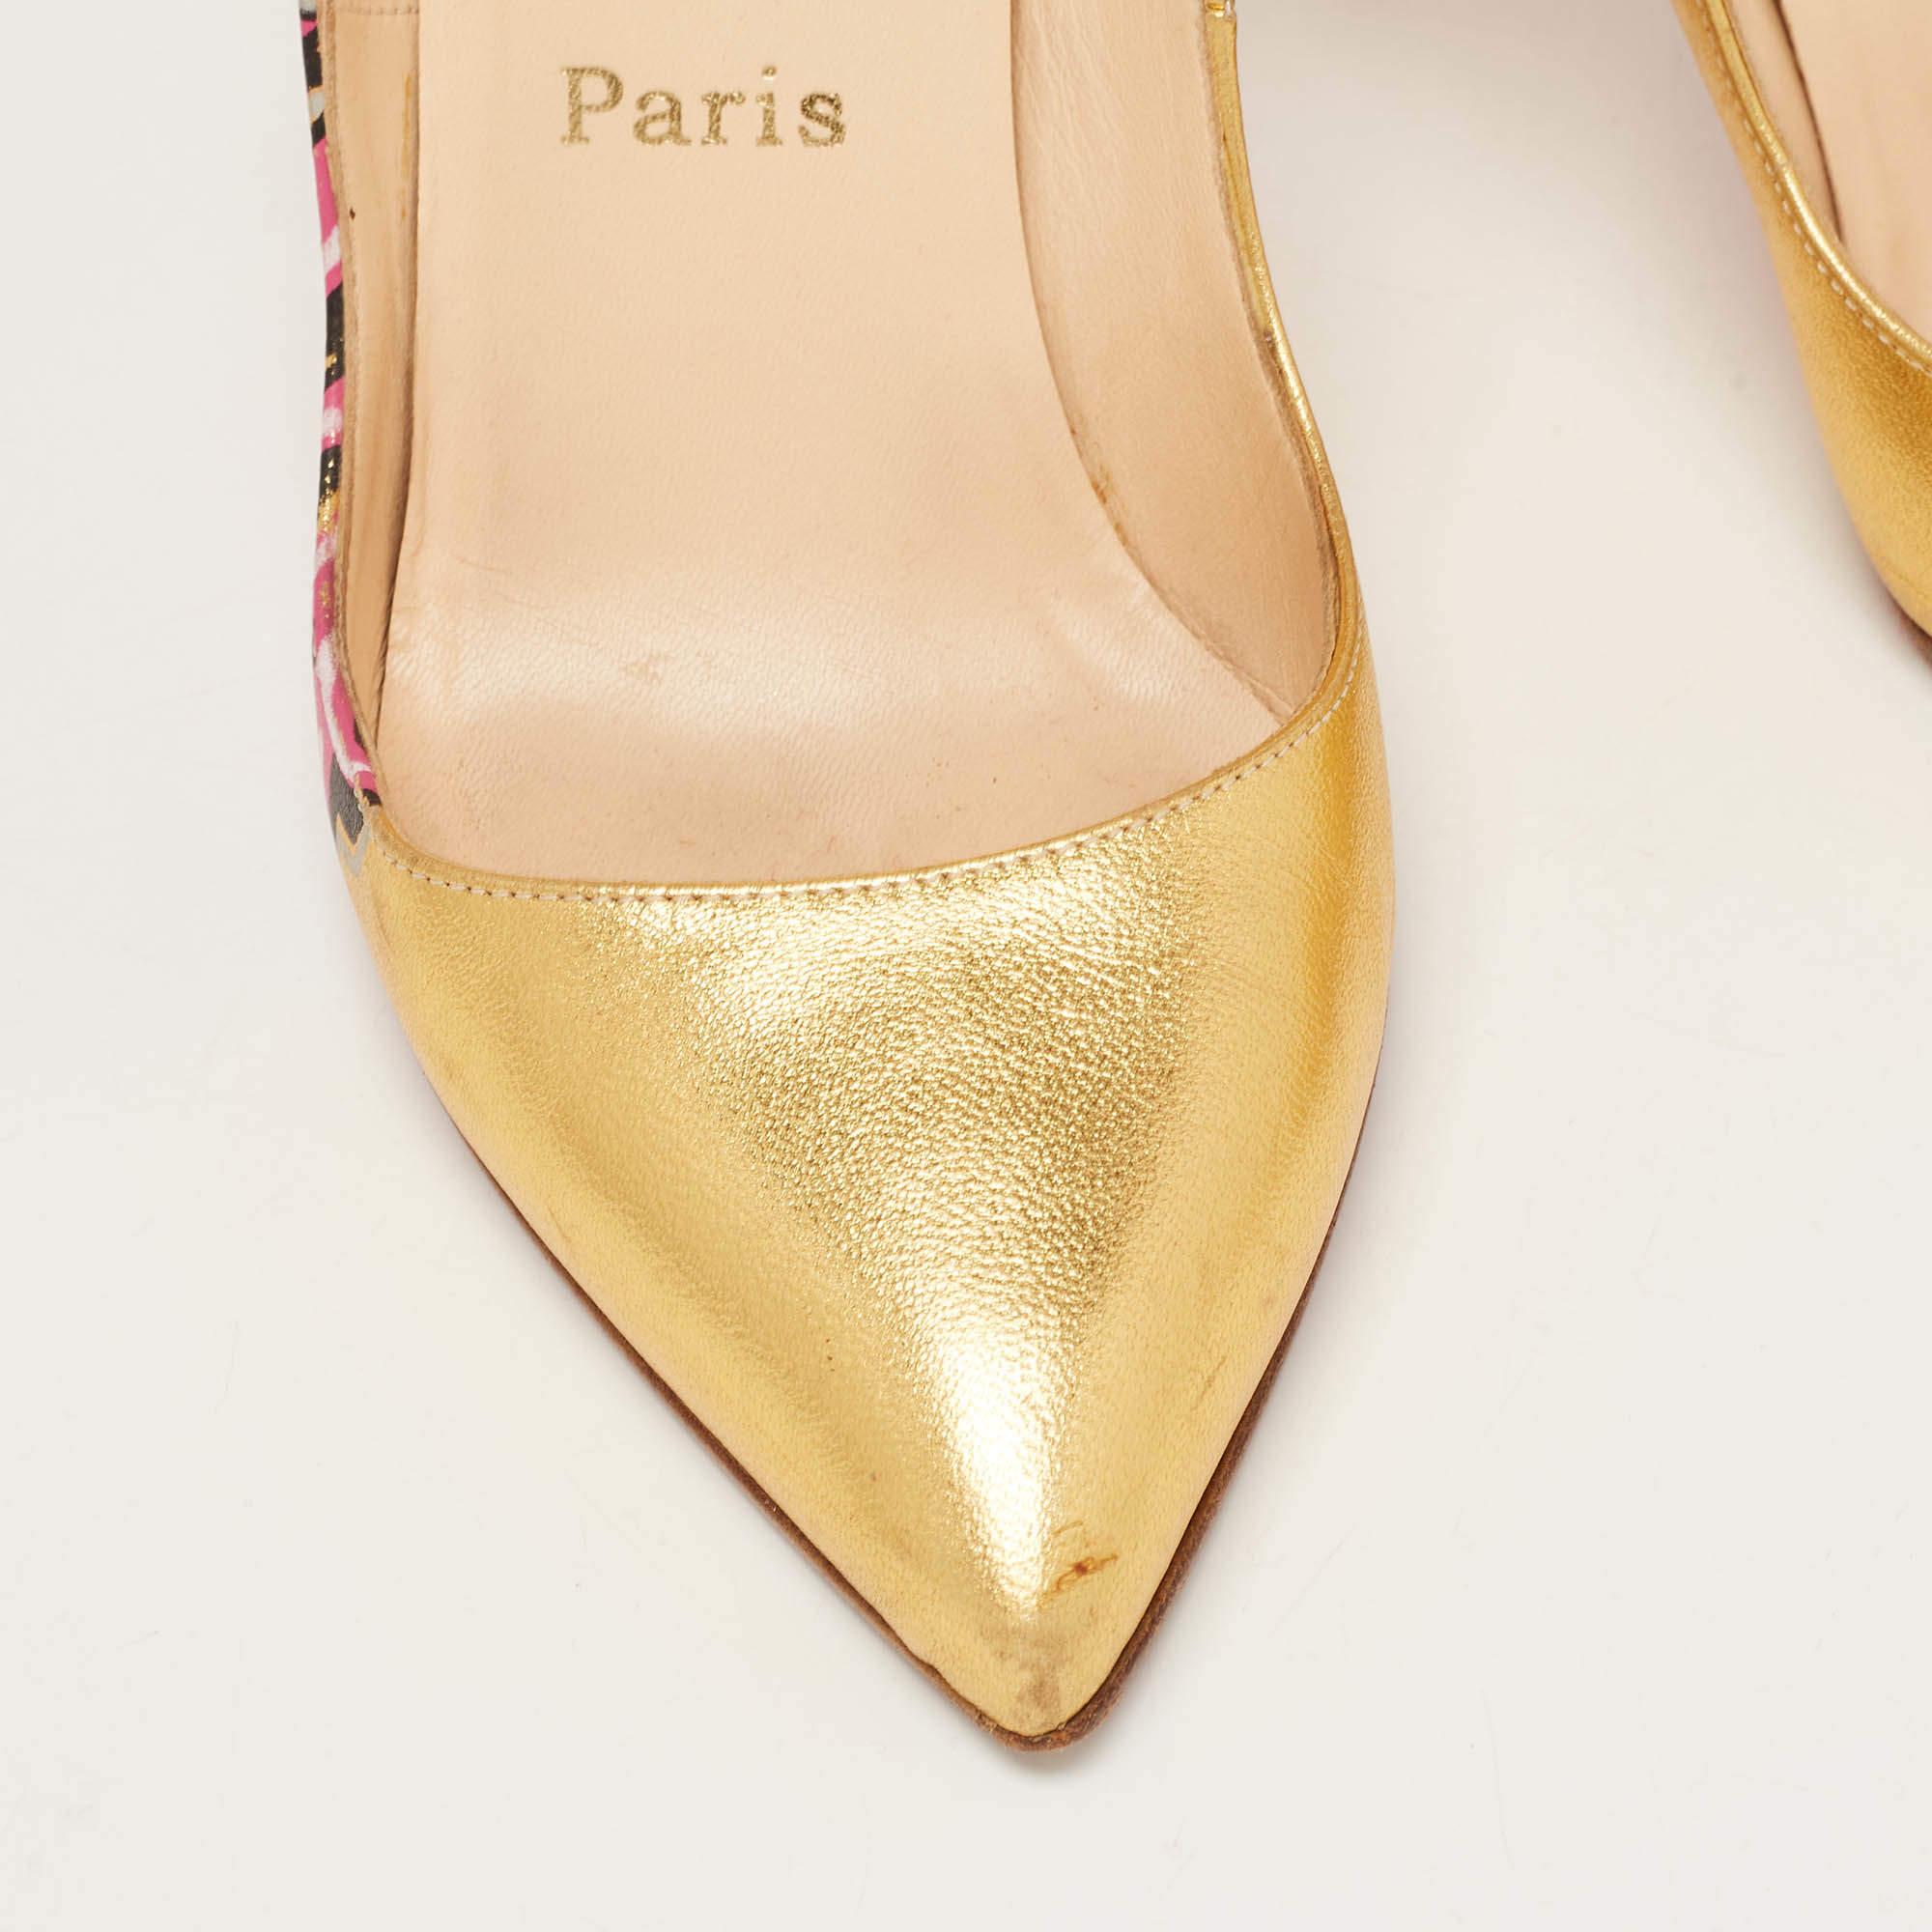 Christian Louboutin Gold Leather Pigalle Graffiti Pumps Size 37.5 For Sale 1